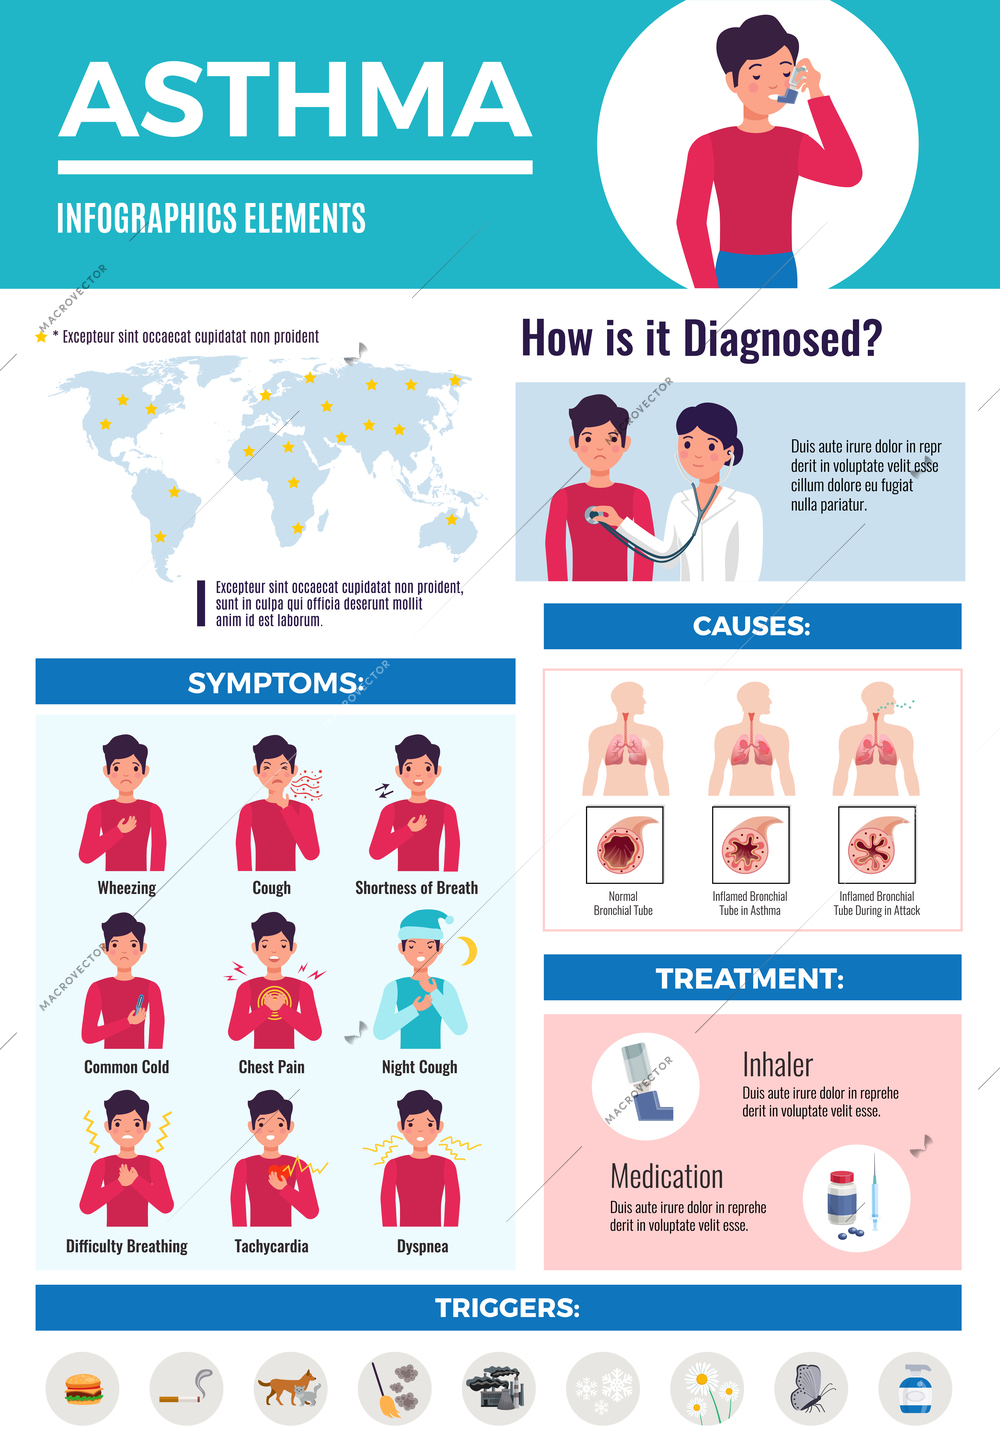 Asthma diagnostic complications treatment medical infographic poster with patient symptoms images map and data flat vector illustration